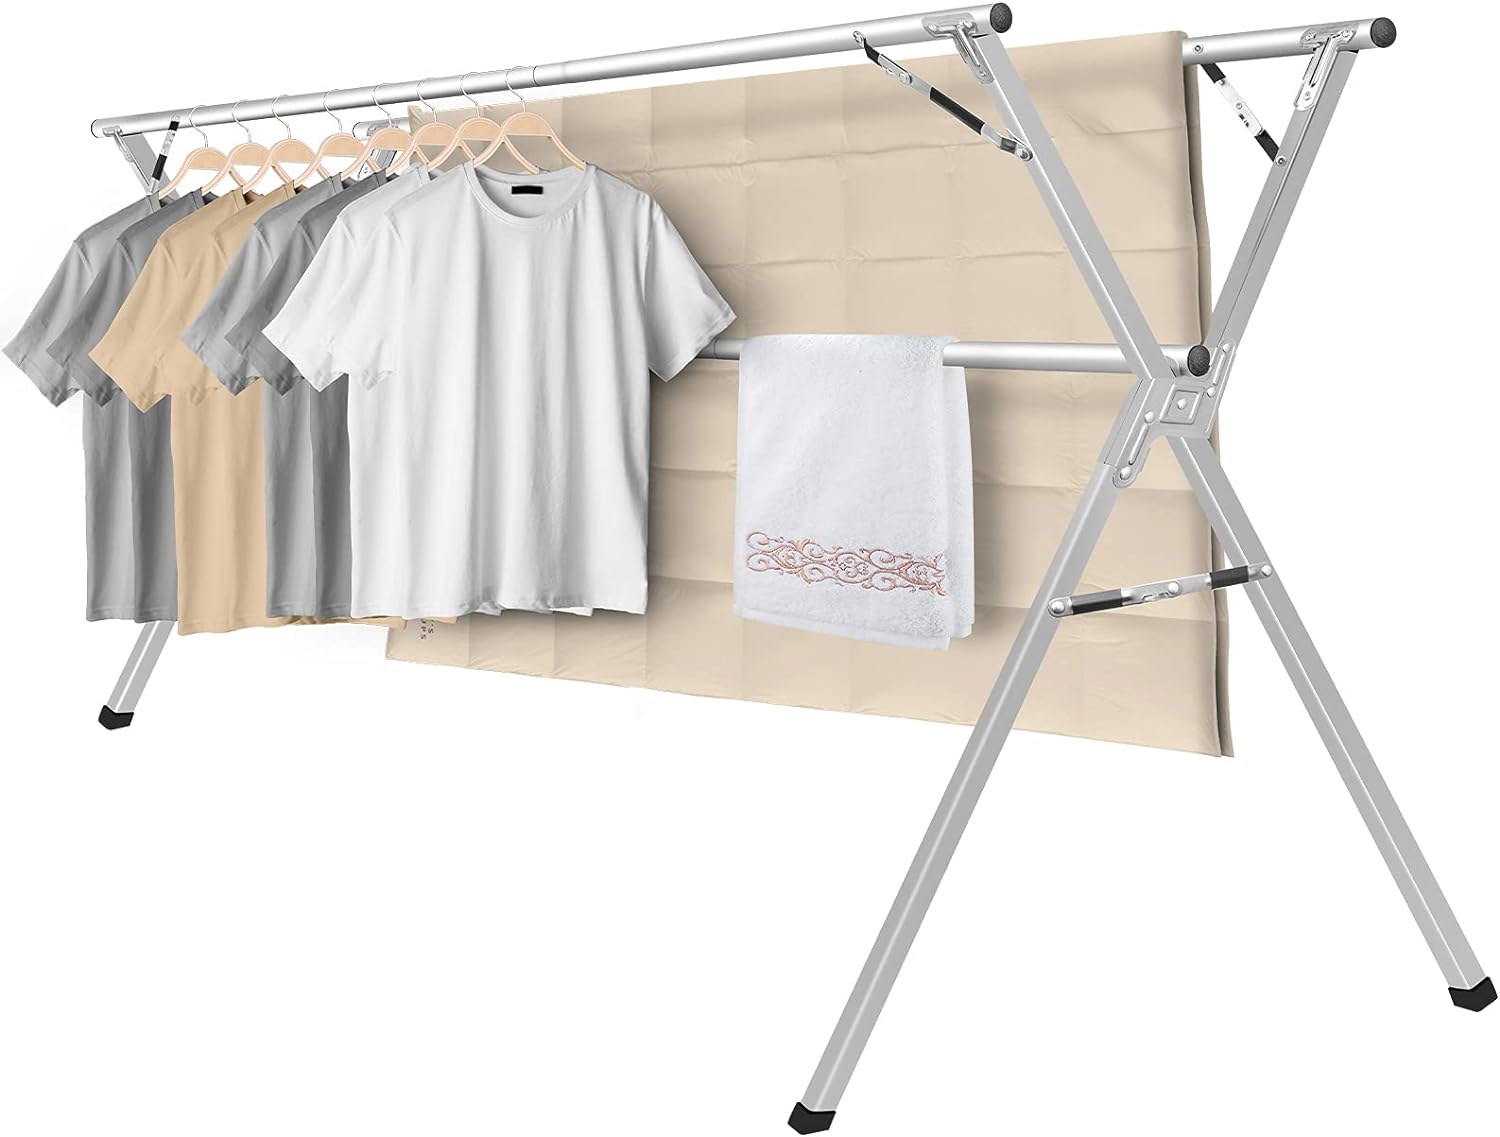 Large Clothes Drying Rack